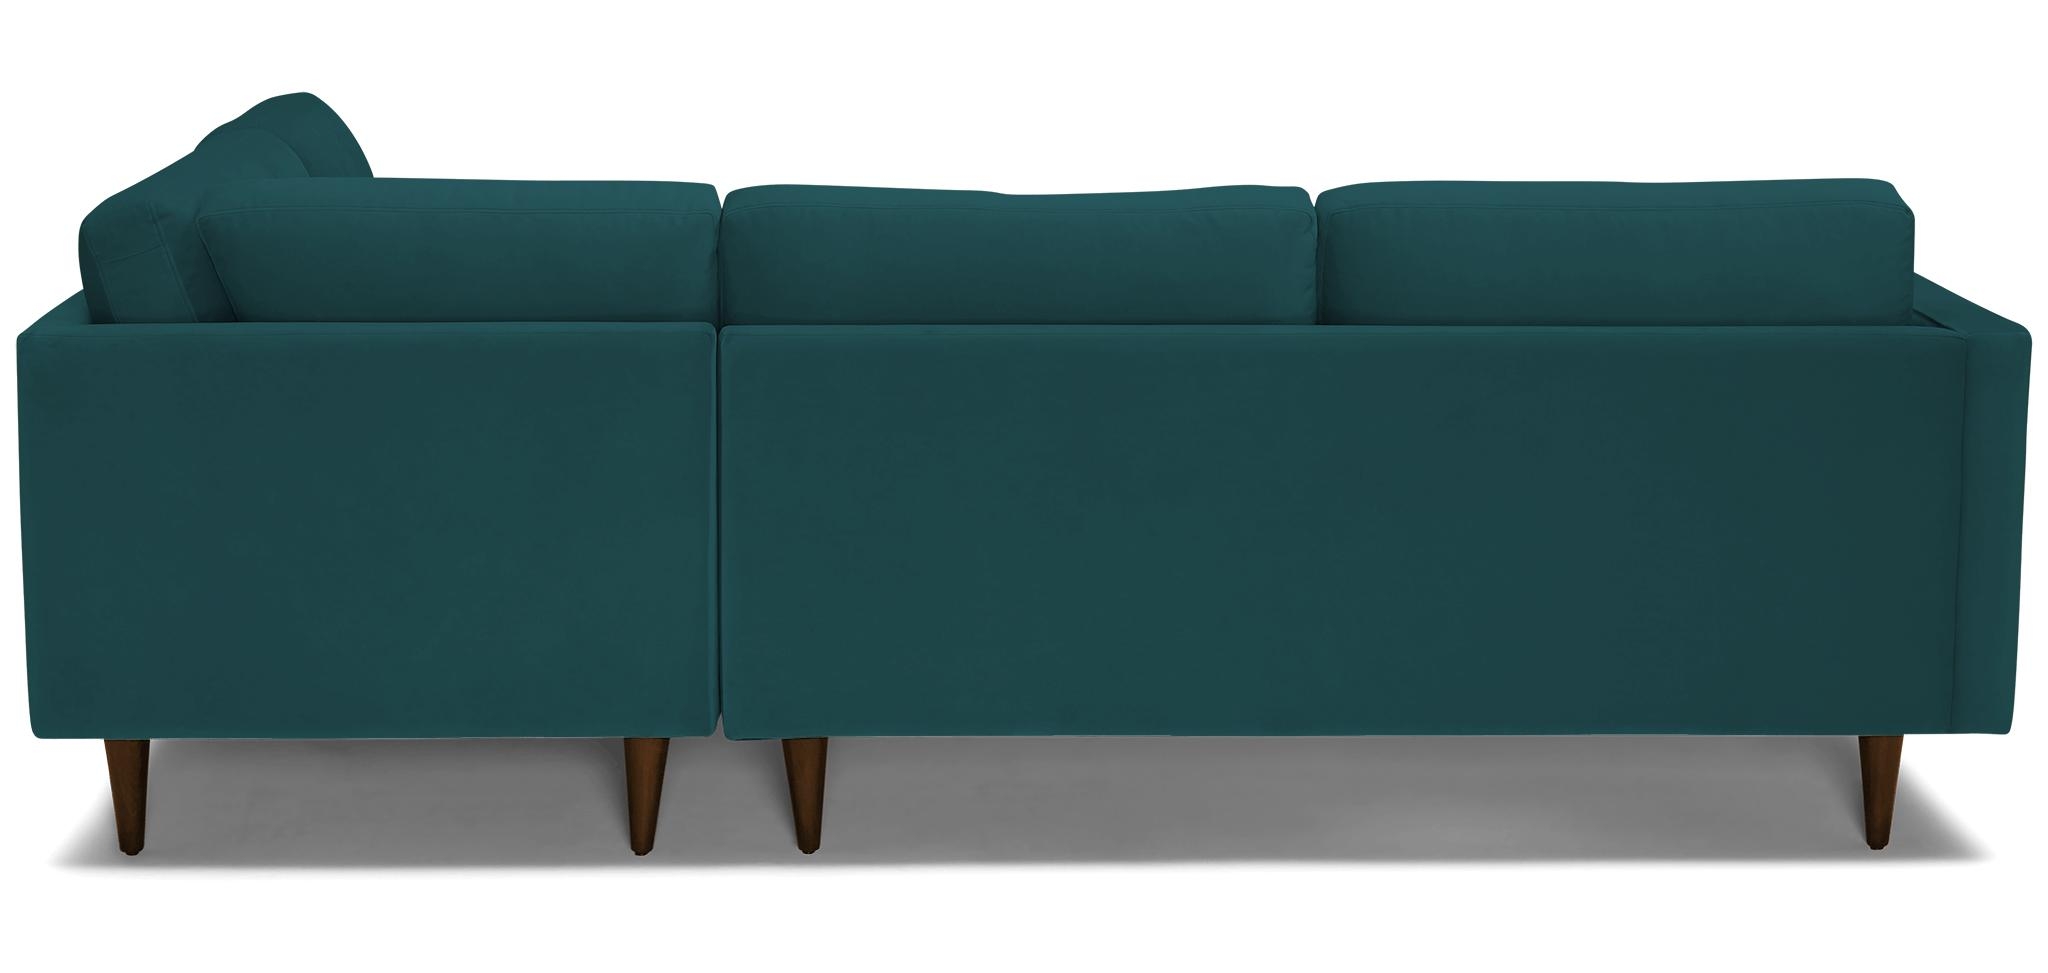 Blue Briar Mid Century Modern Sectional with Bumper - Royale Peacock - Mocha - Left - Image 5